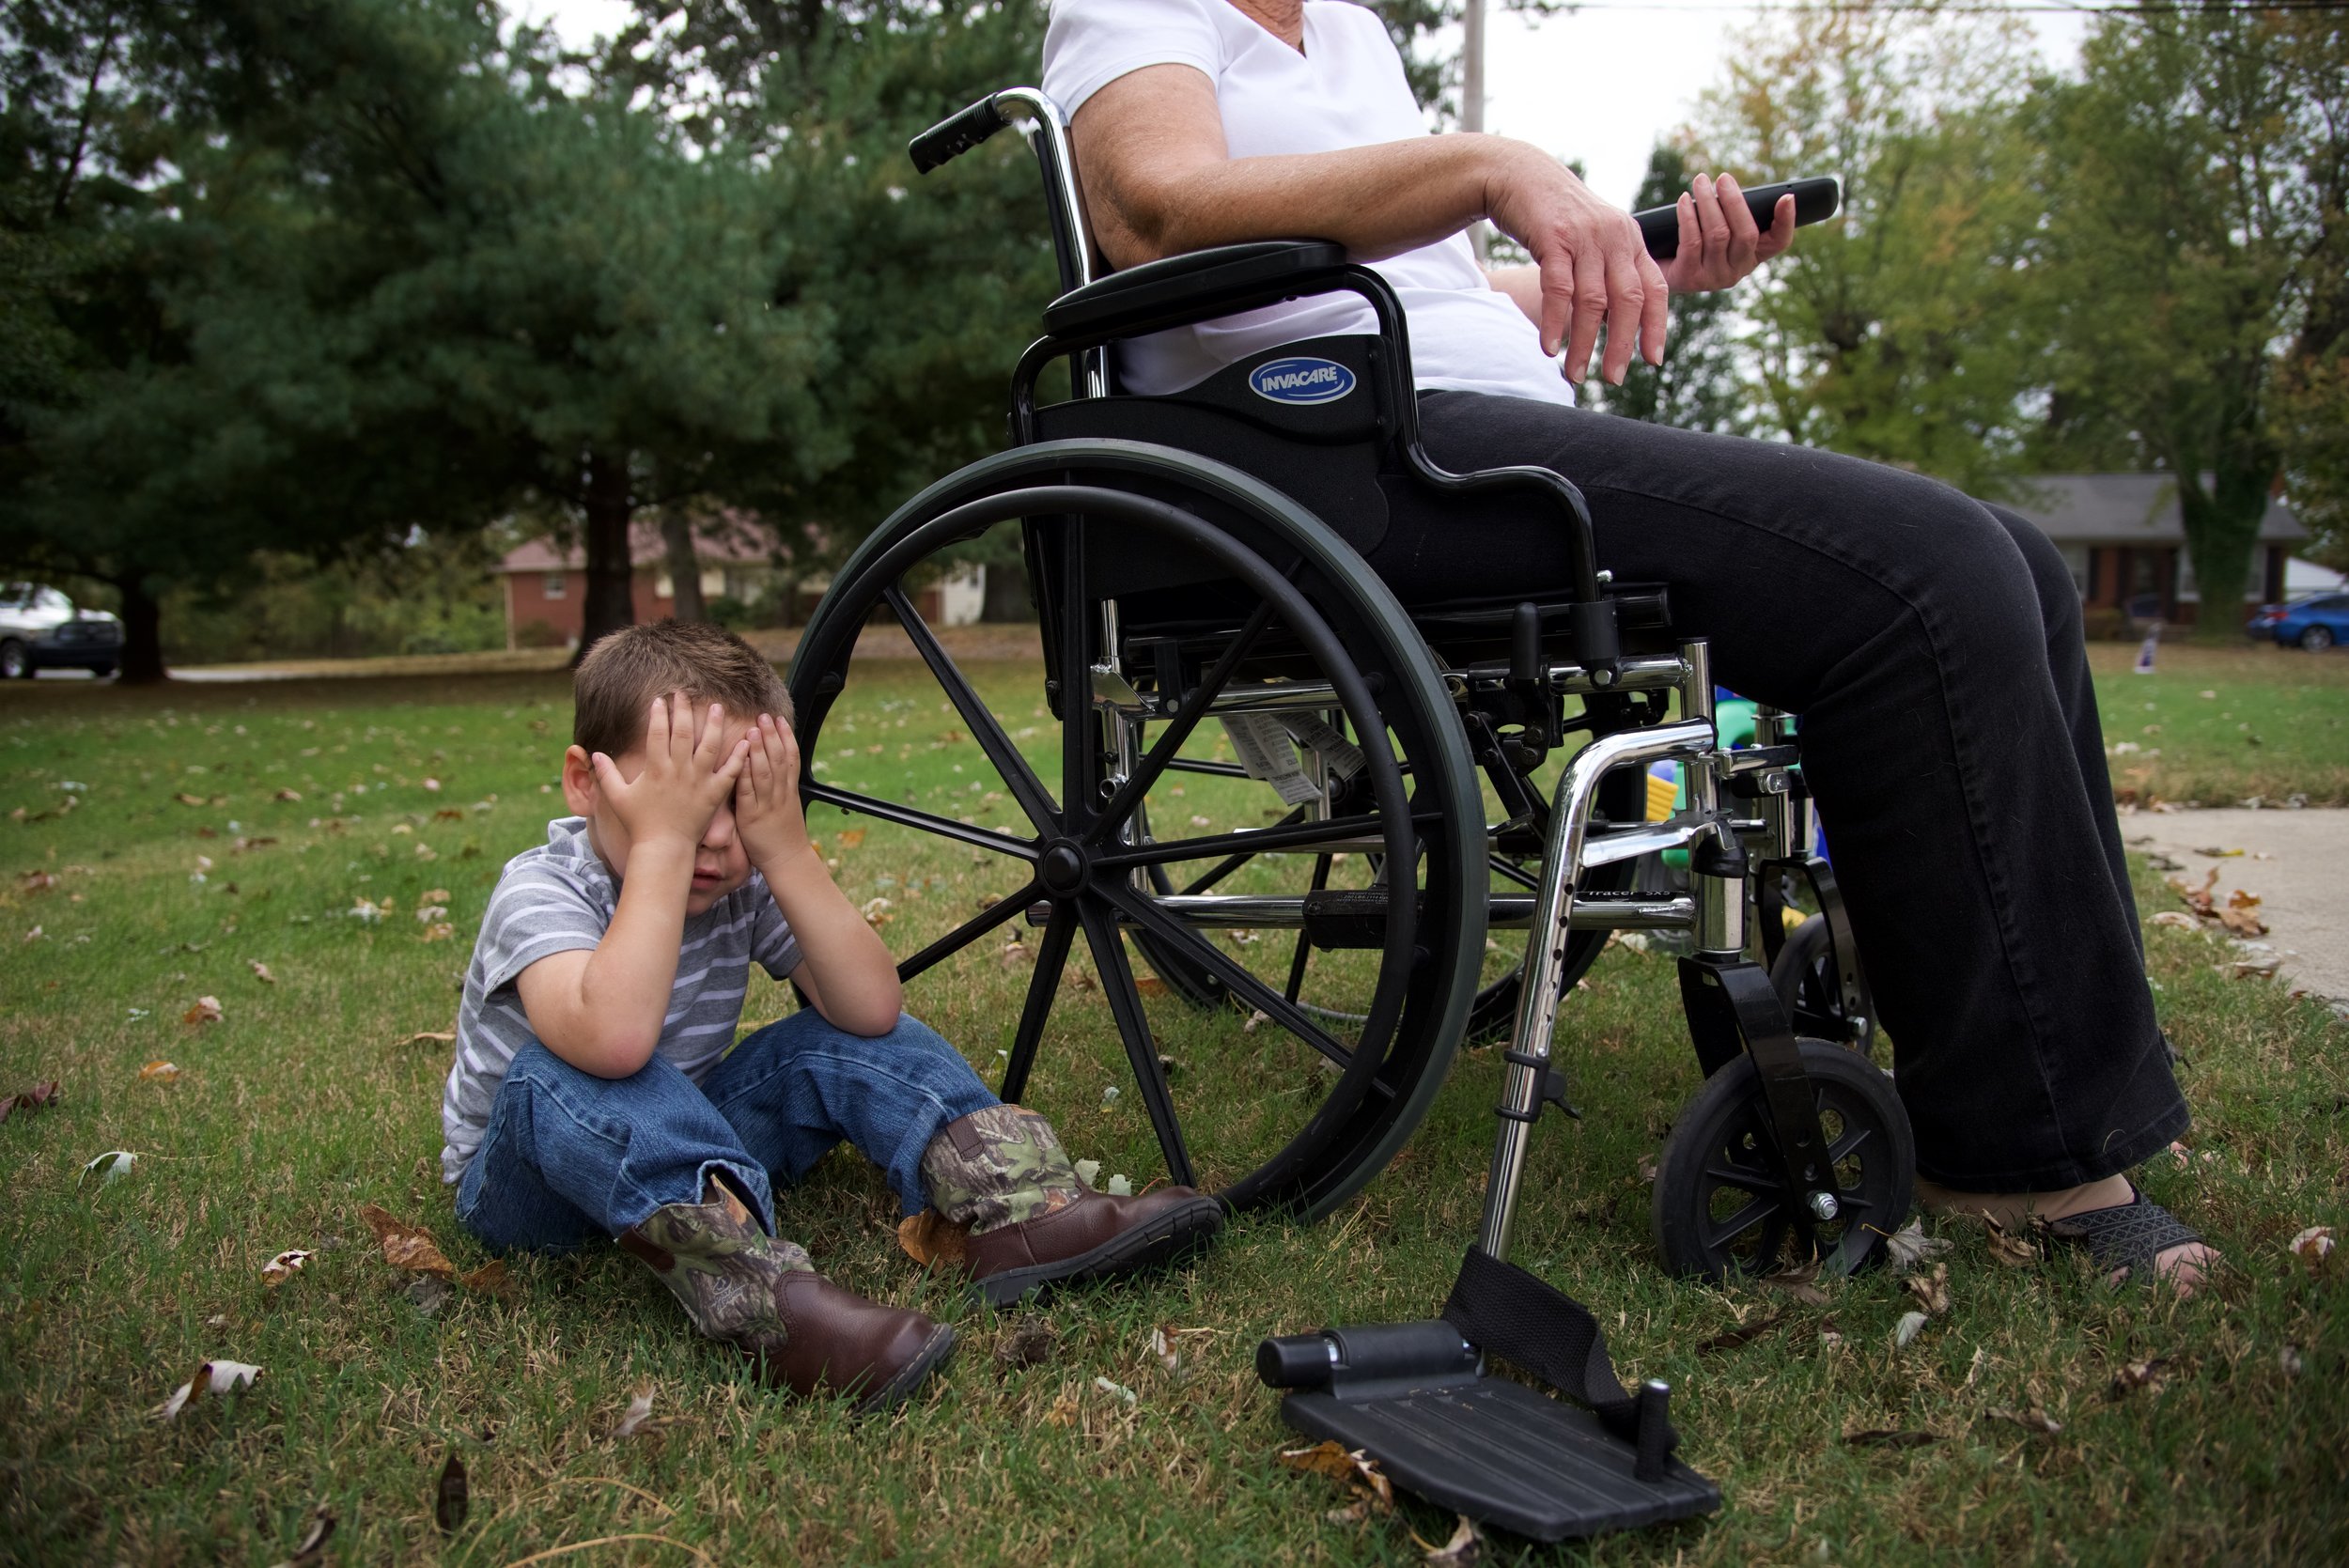  Bentley Francis, 3, sulks at the feet of his great-grandmother Jean Thetford, 78. &nbsp;The wheelchair is more of chair for Thetford who only uses it when she needs a place to sit outside. Keeping up with a 3-year-old at her age can be difficult but